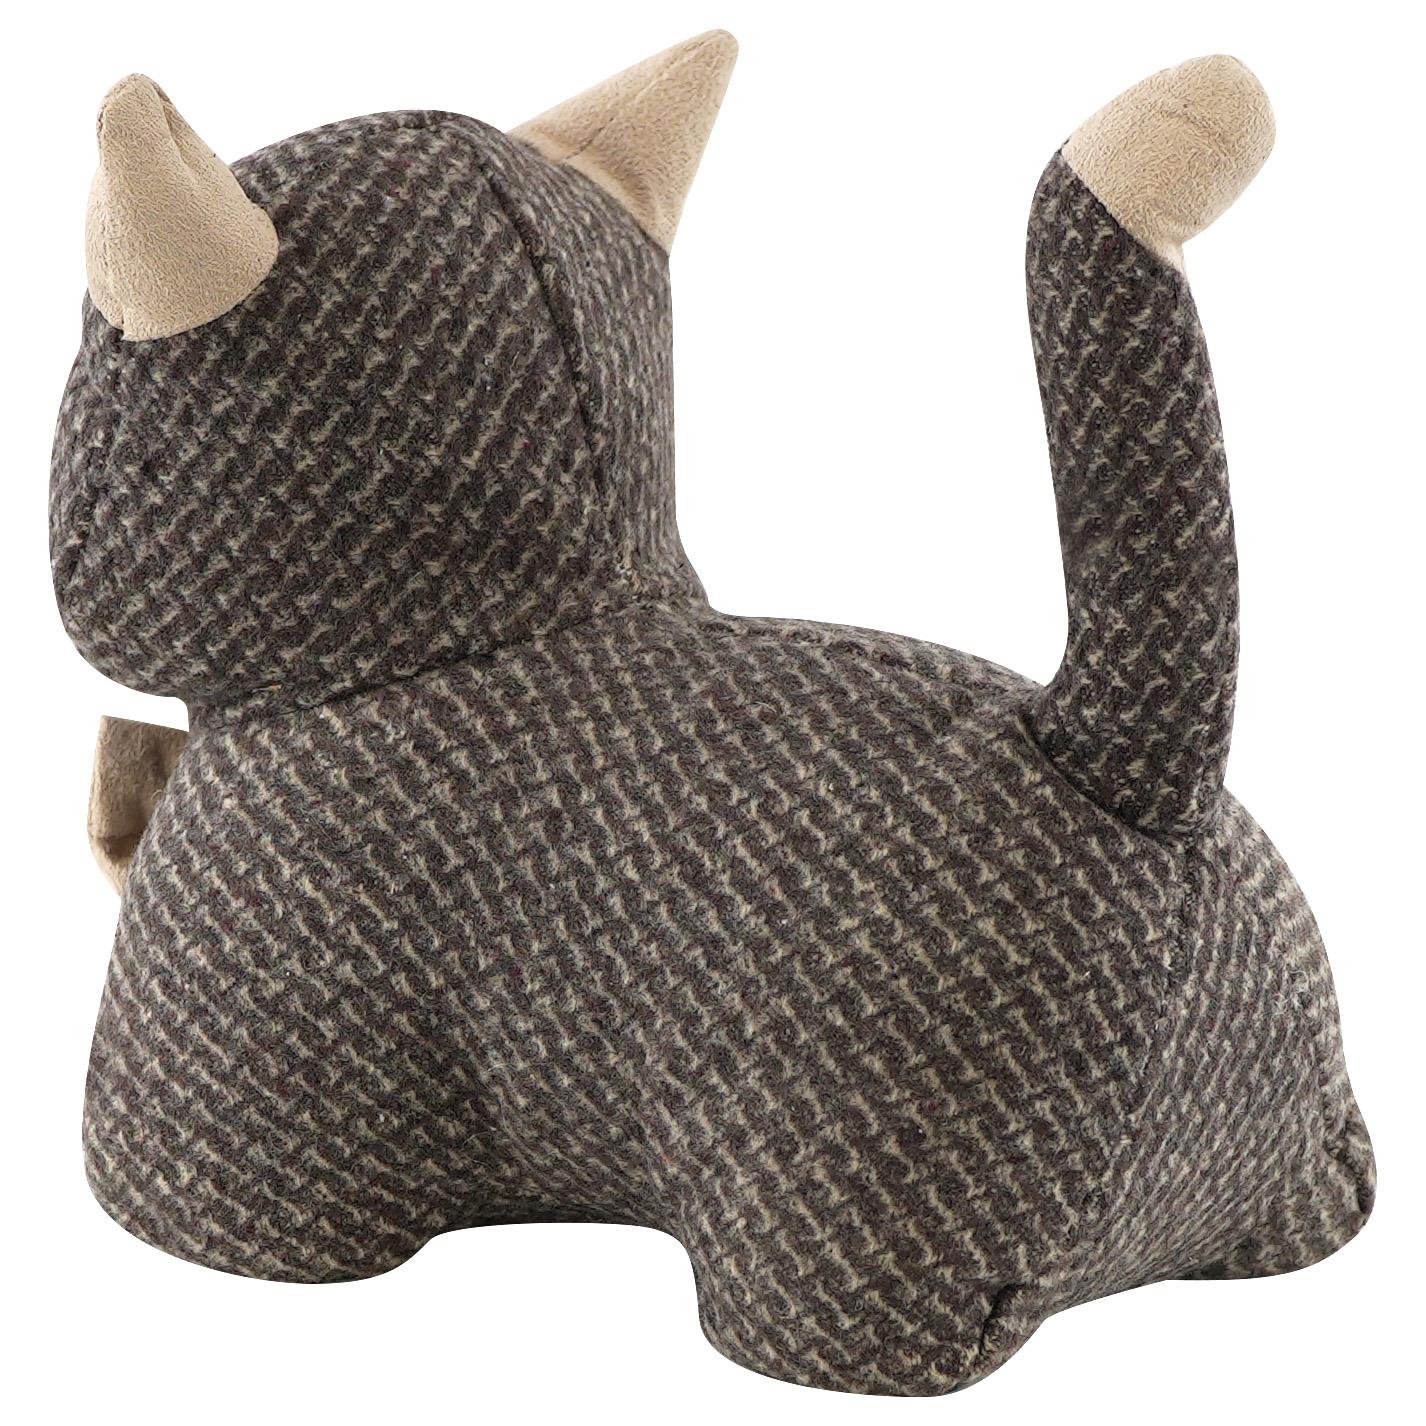 Fabric Kitten Door Stopper by The Magic Toy Shop - UKBuyZone